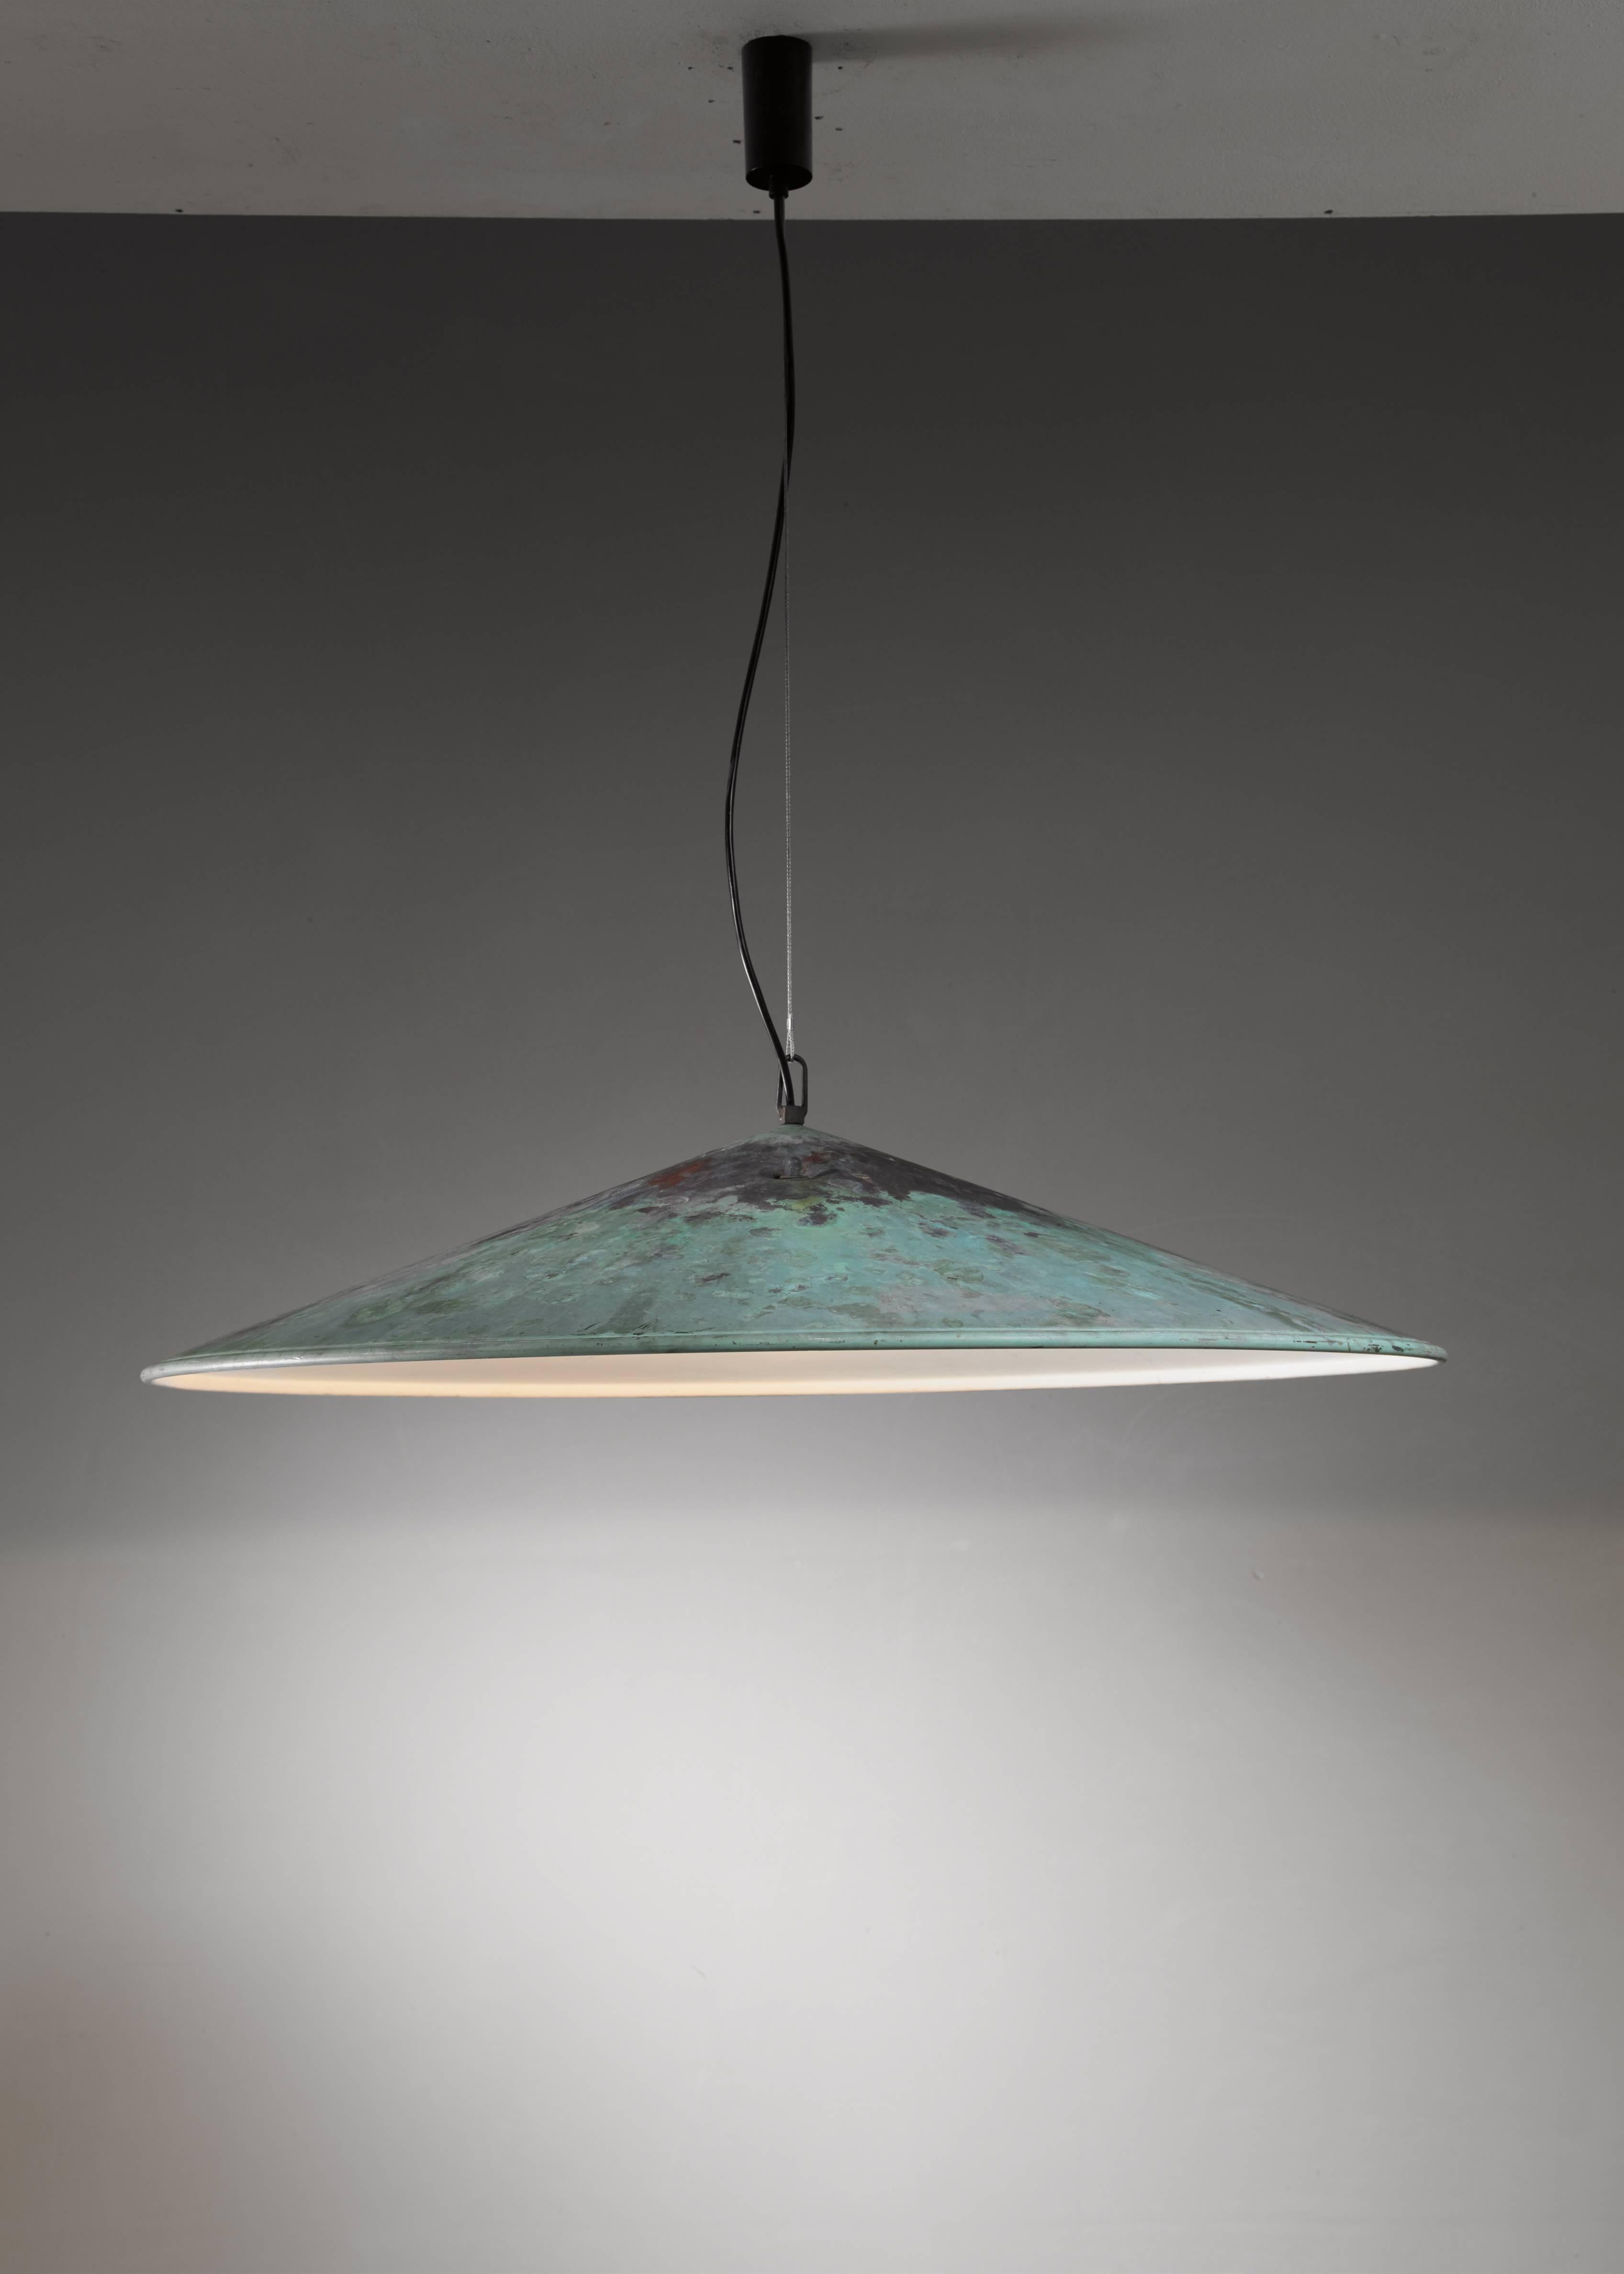 A very large (82 cm diameter) pendant lamp in verdigris copper, attributed to Danish designer Henning Larsen. We have a matching second lamp available to make a pair.

        